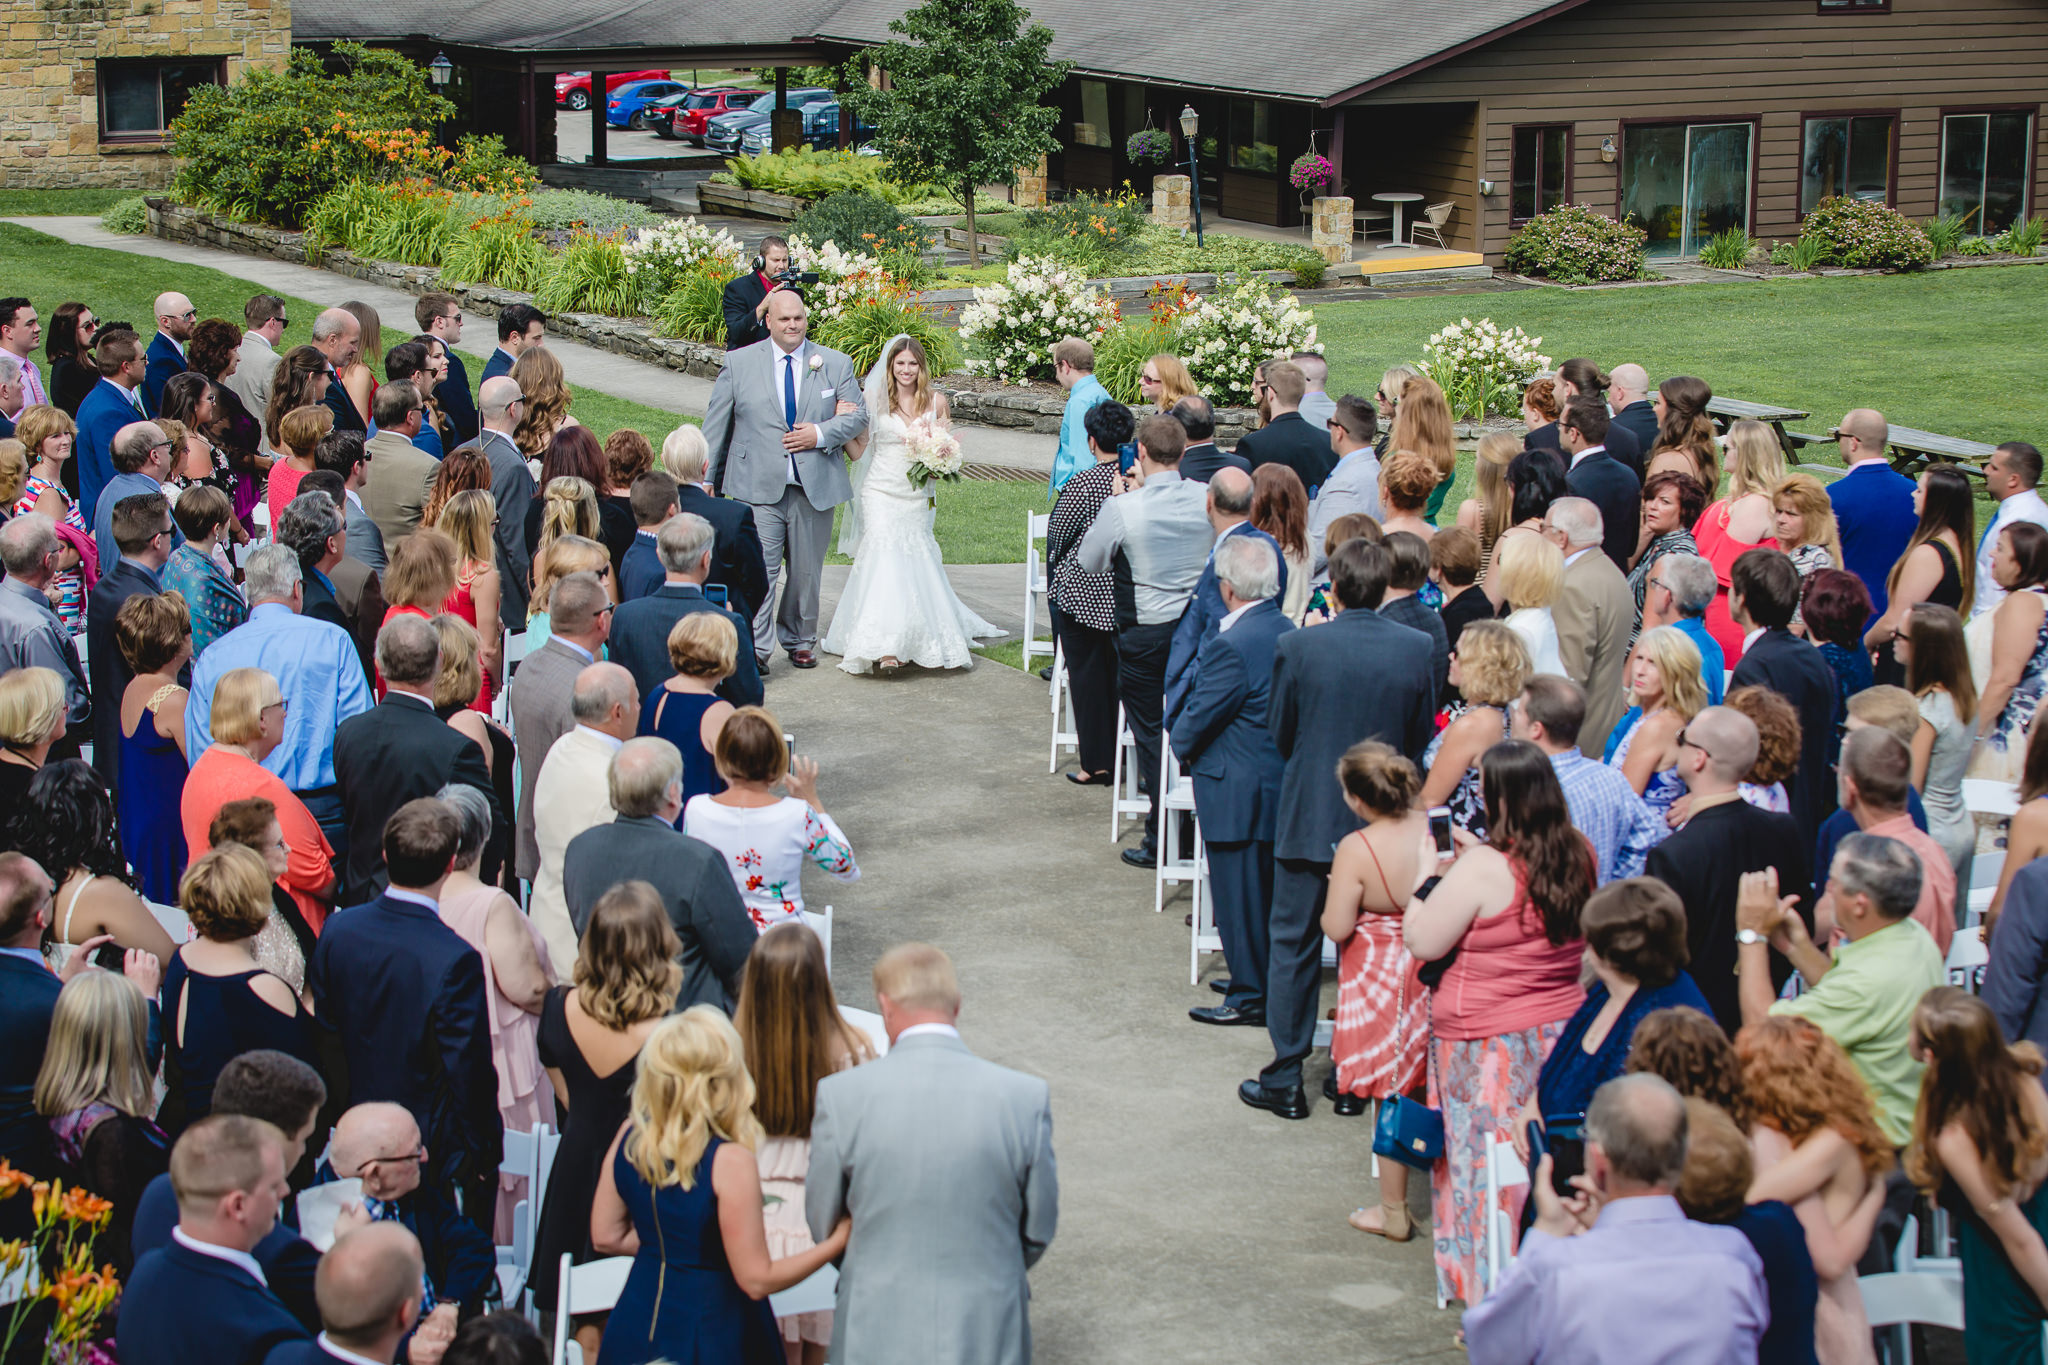 Father of the bride walks his daughter down the aisle at Hidden Valley Resort